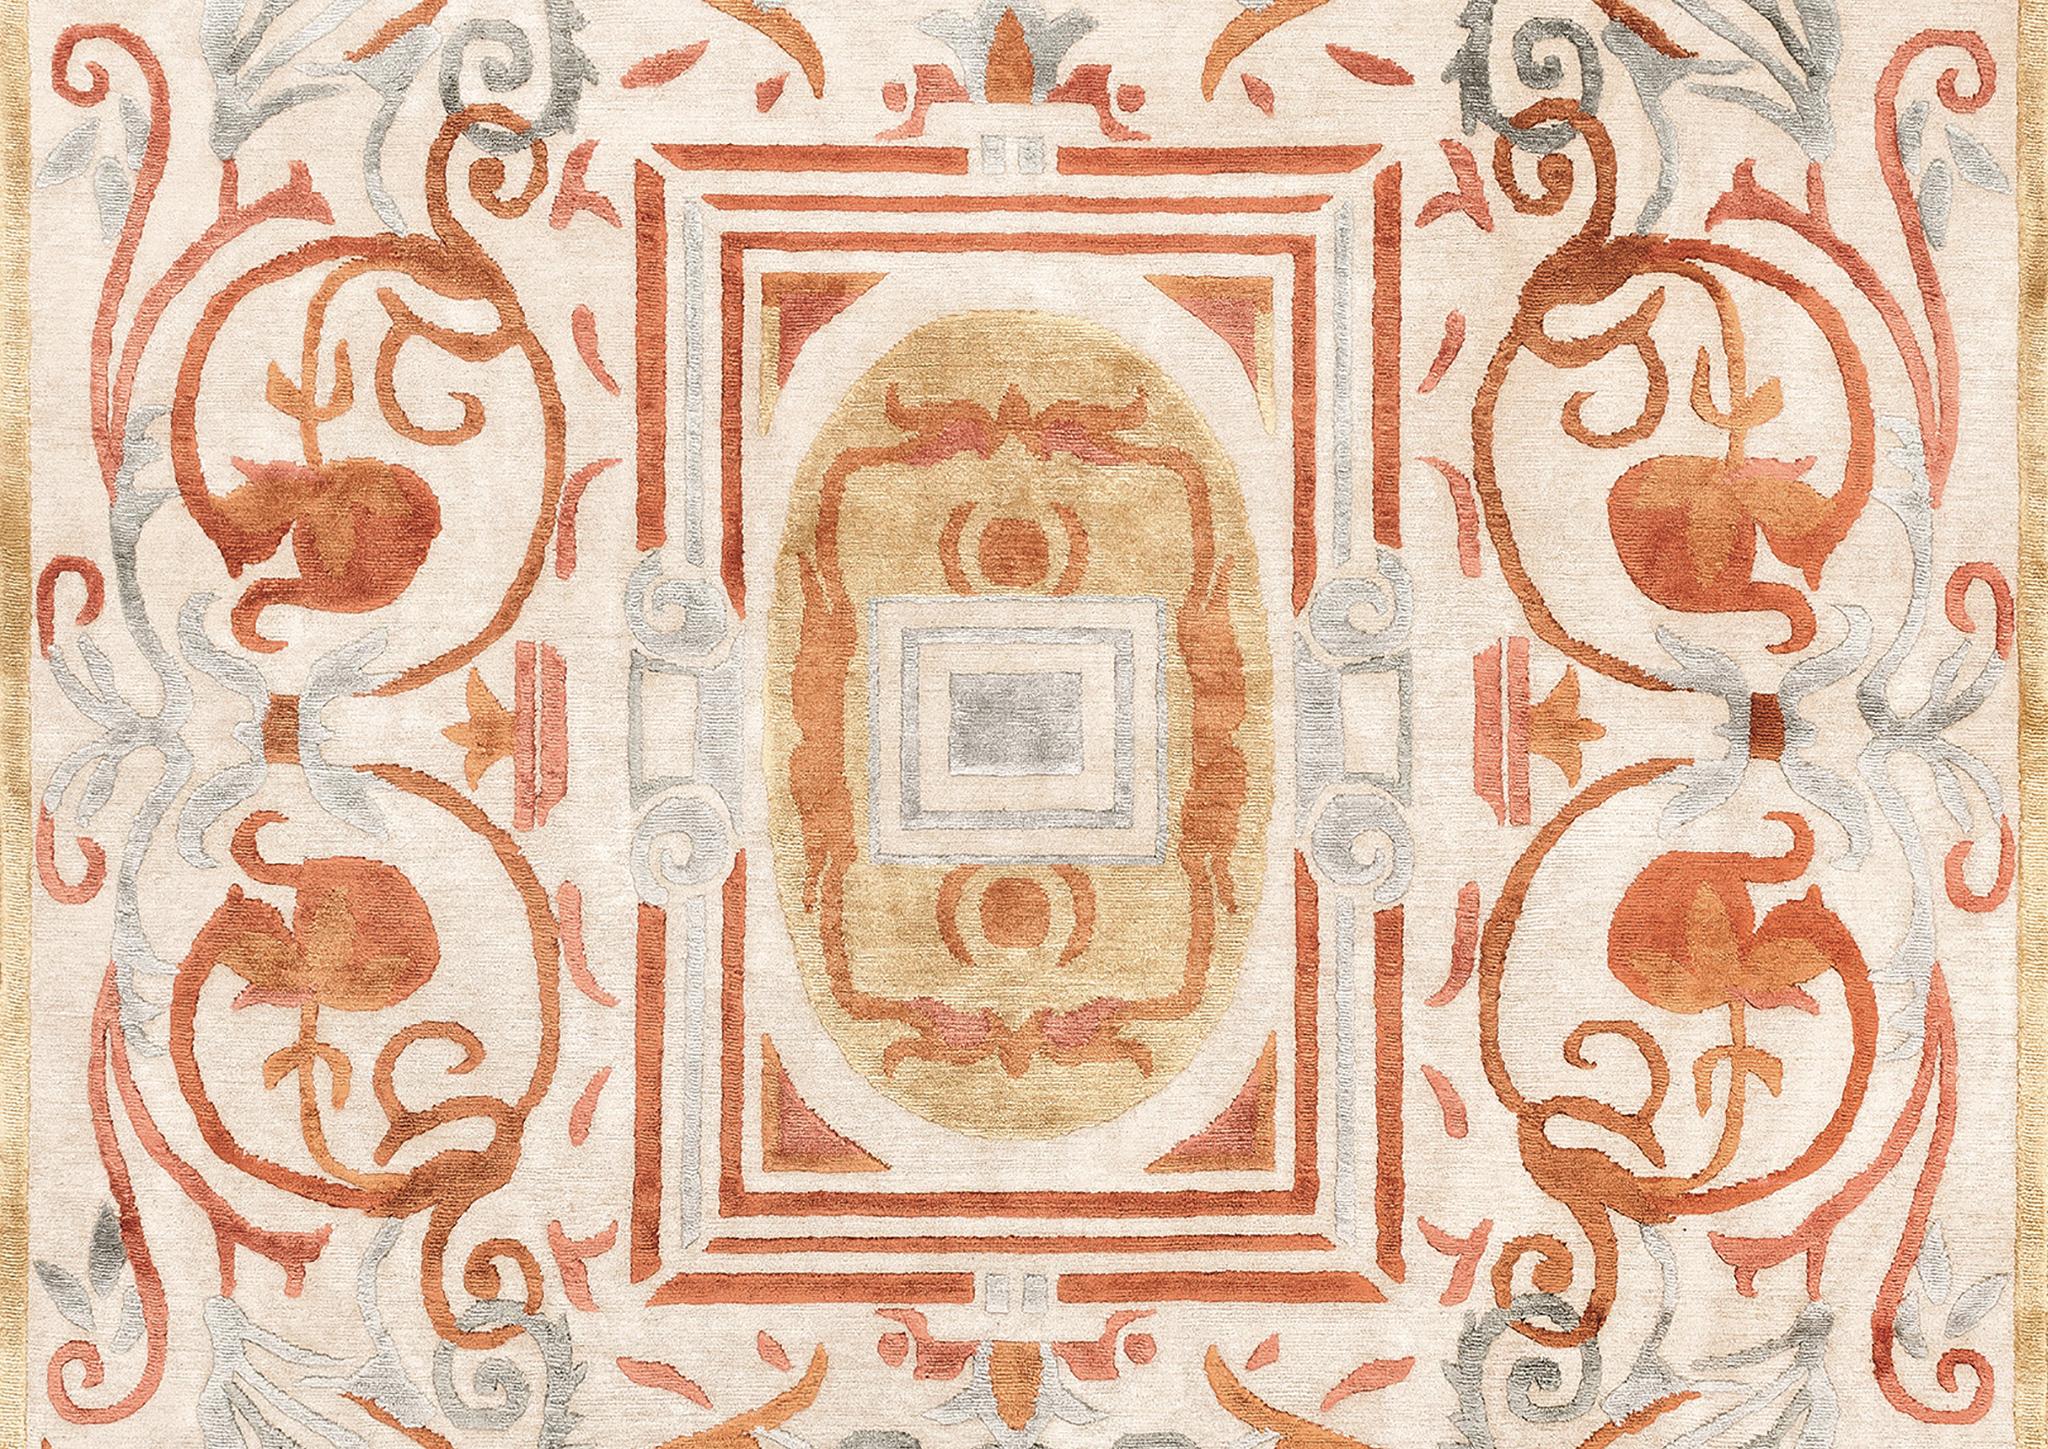 Nepalese 21st Century Carpet Rug Richelieu in Himalayan Wool and Silk Gray, Terracotta